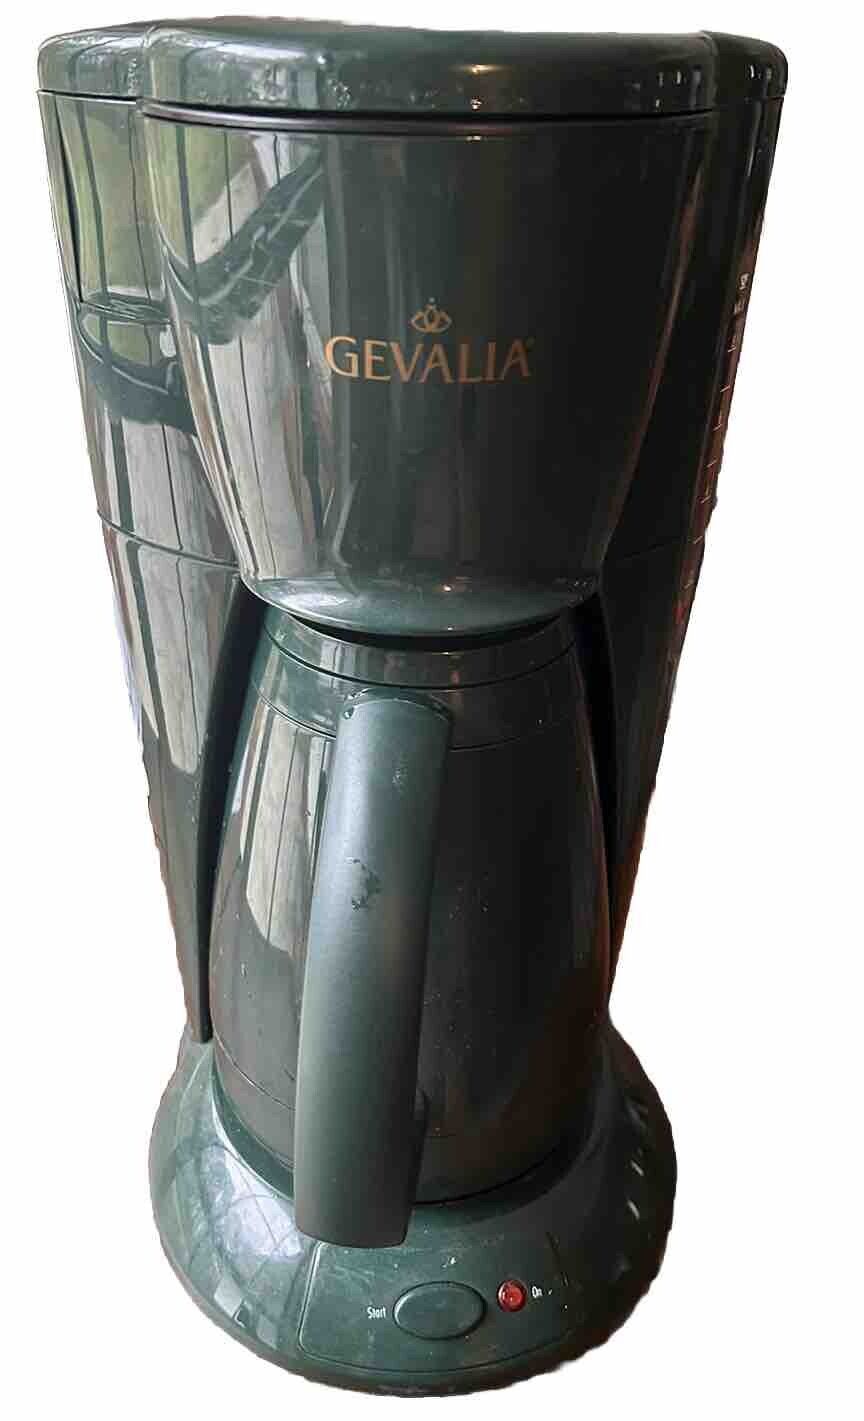 Gevalia Coffee Maker 8 Cup Thermal Carafe C60-BC Filter Basket Green Tested